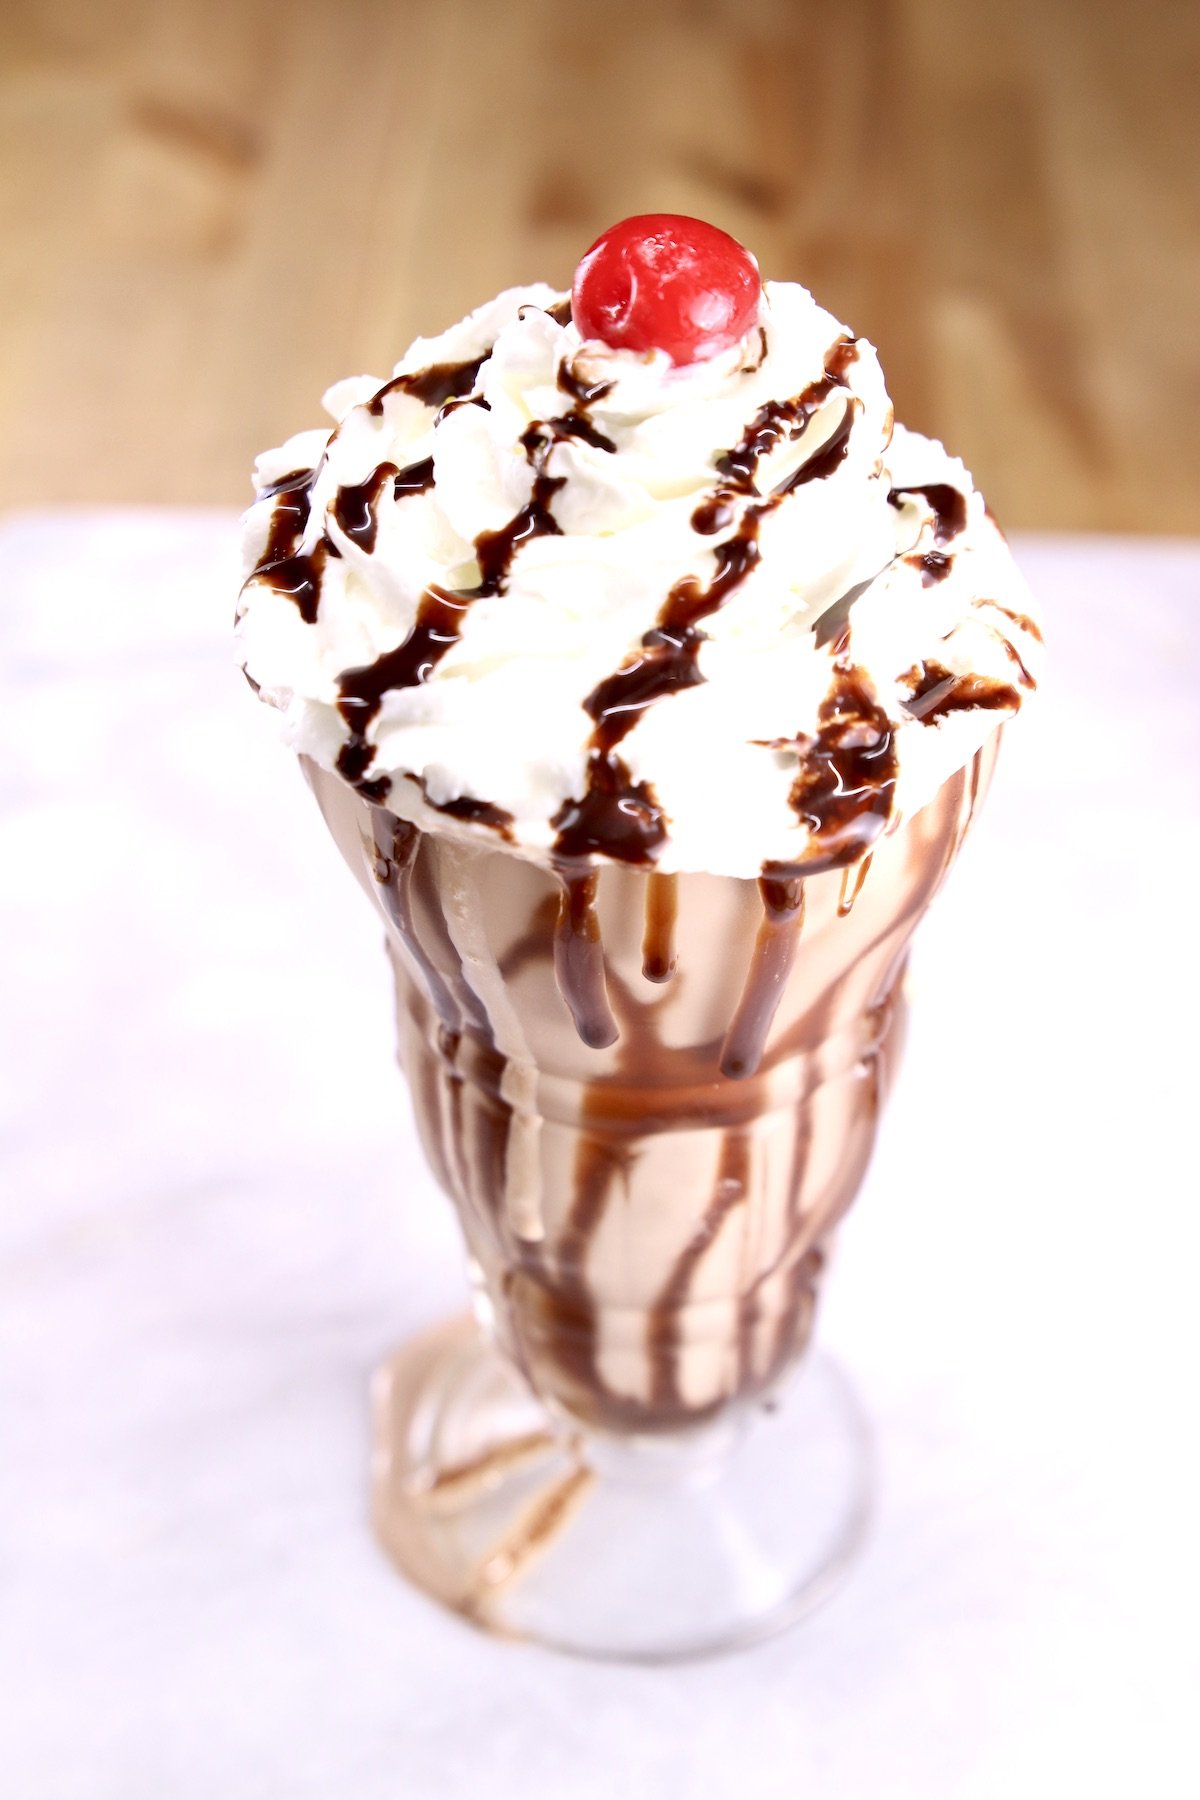 Baileys Chocolate Milkshake with whipped cream and a cherry on top